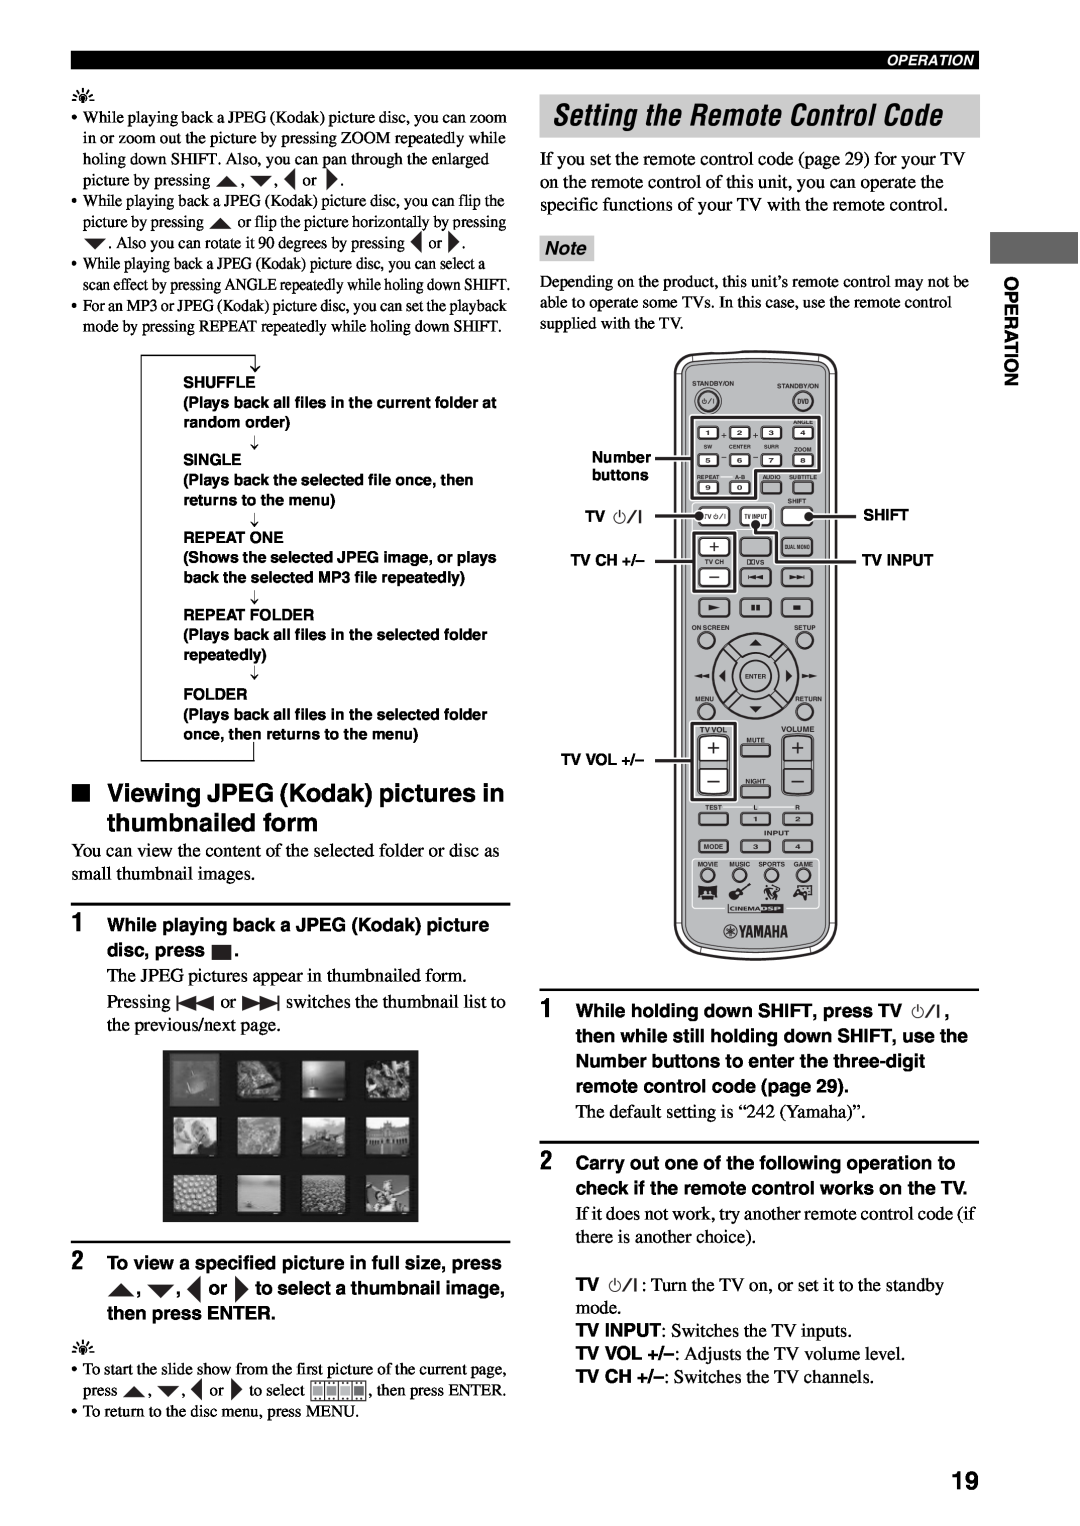 Yamaha AVX-S30 owner manual Setting the Remote Control Code, Viewing JPEG Kodak pictures in thumbnailed form 